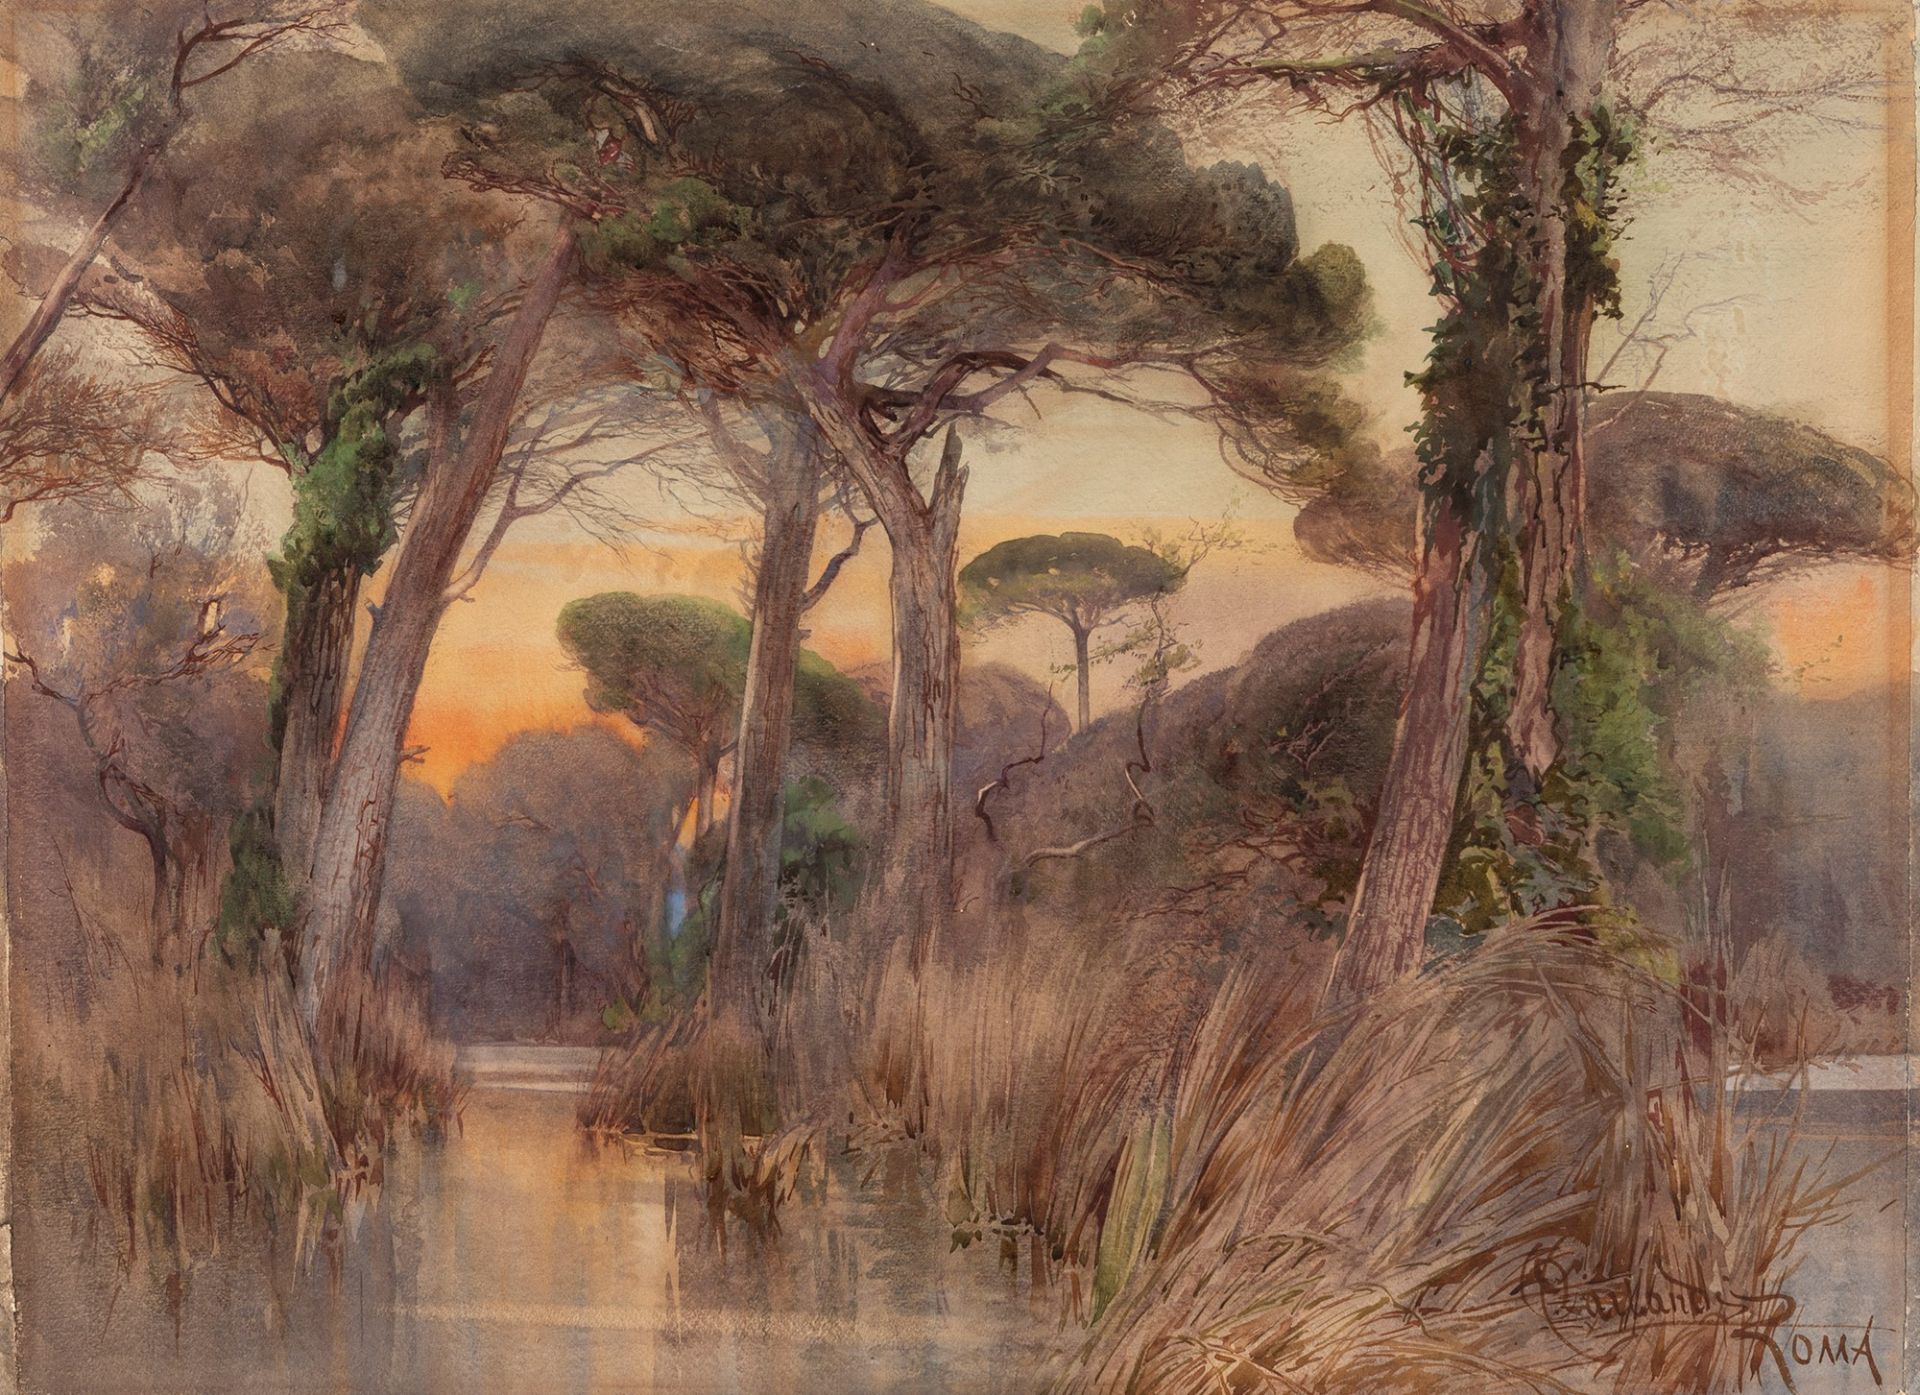 Onorato Carlandi (Roma 1848-1939) - "Sunset in the forest of Castel Fusano"